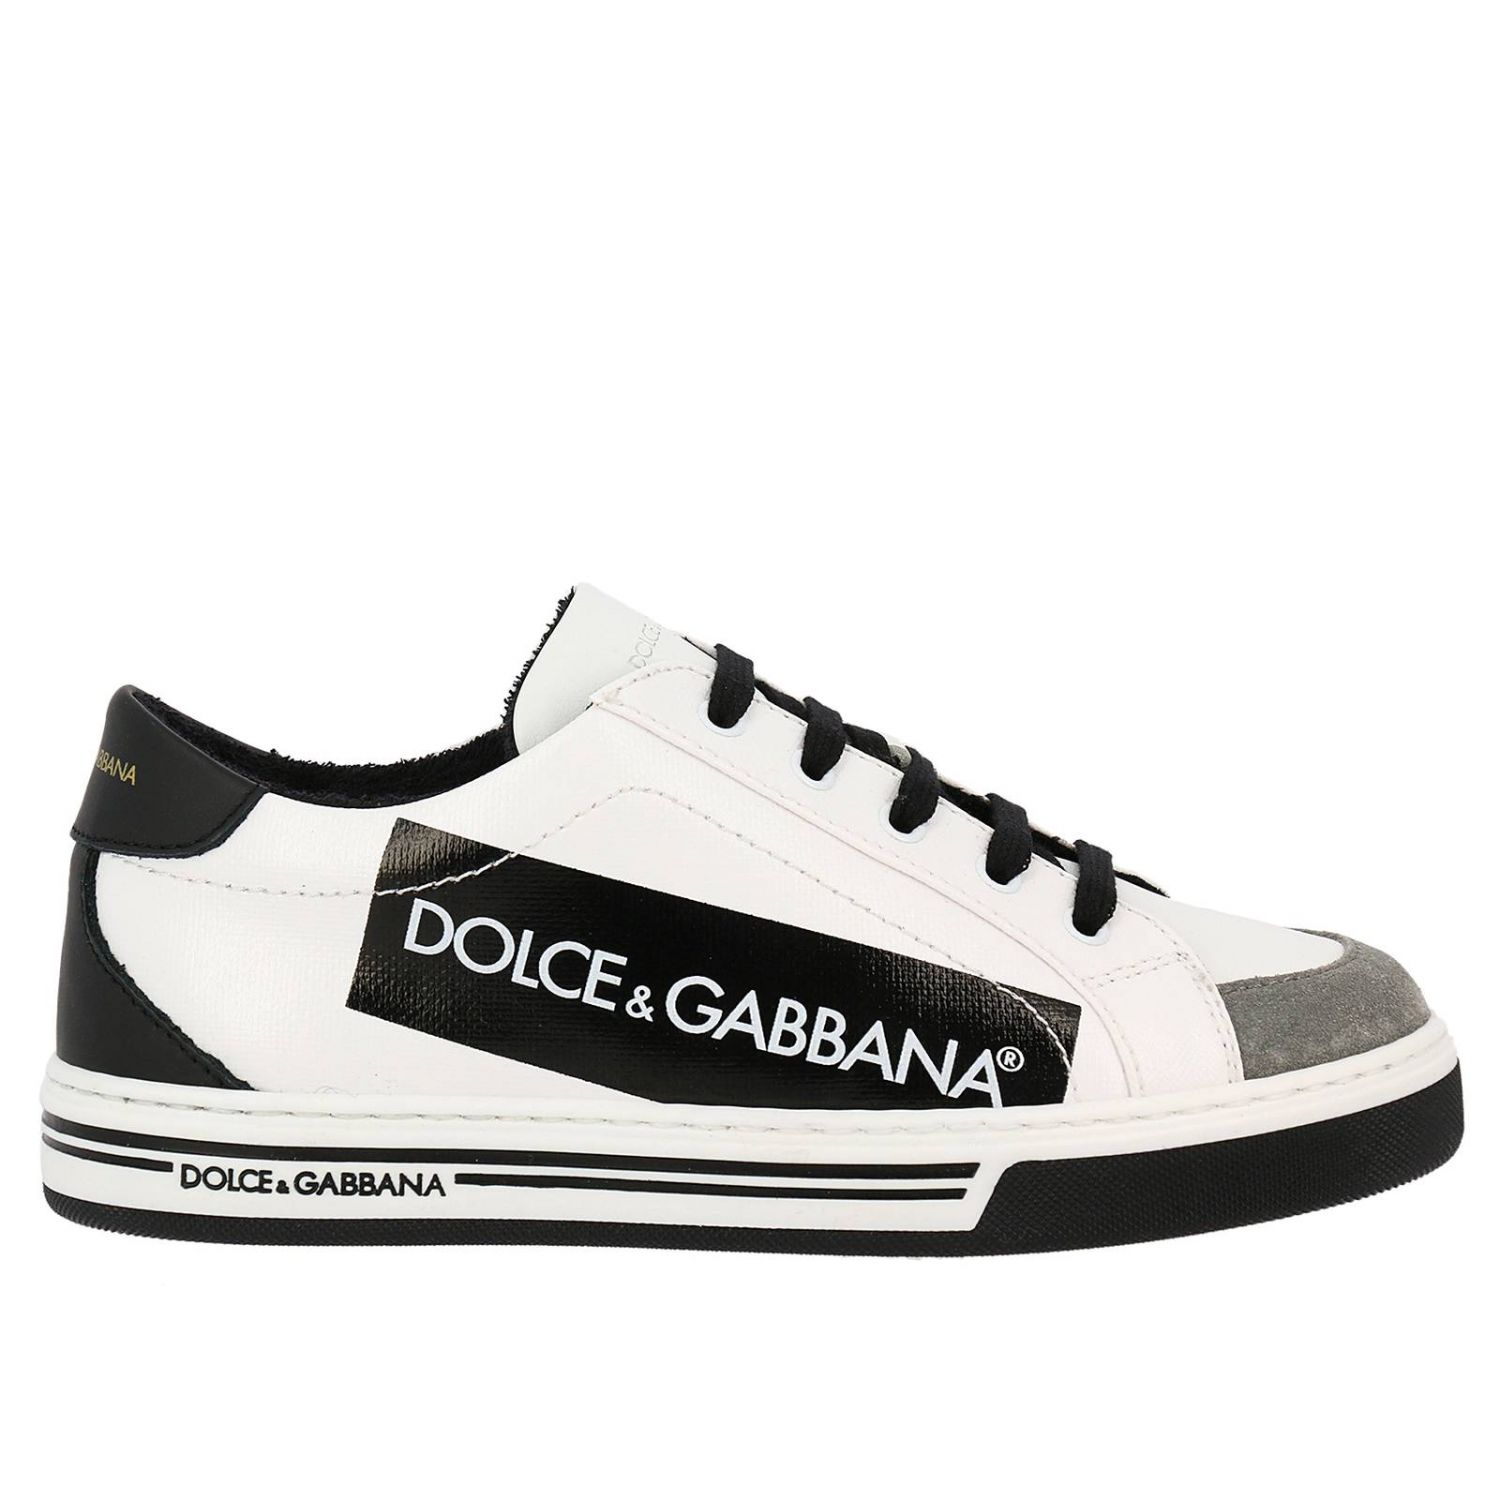 d&g kids trainers